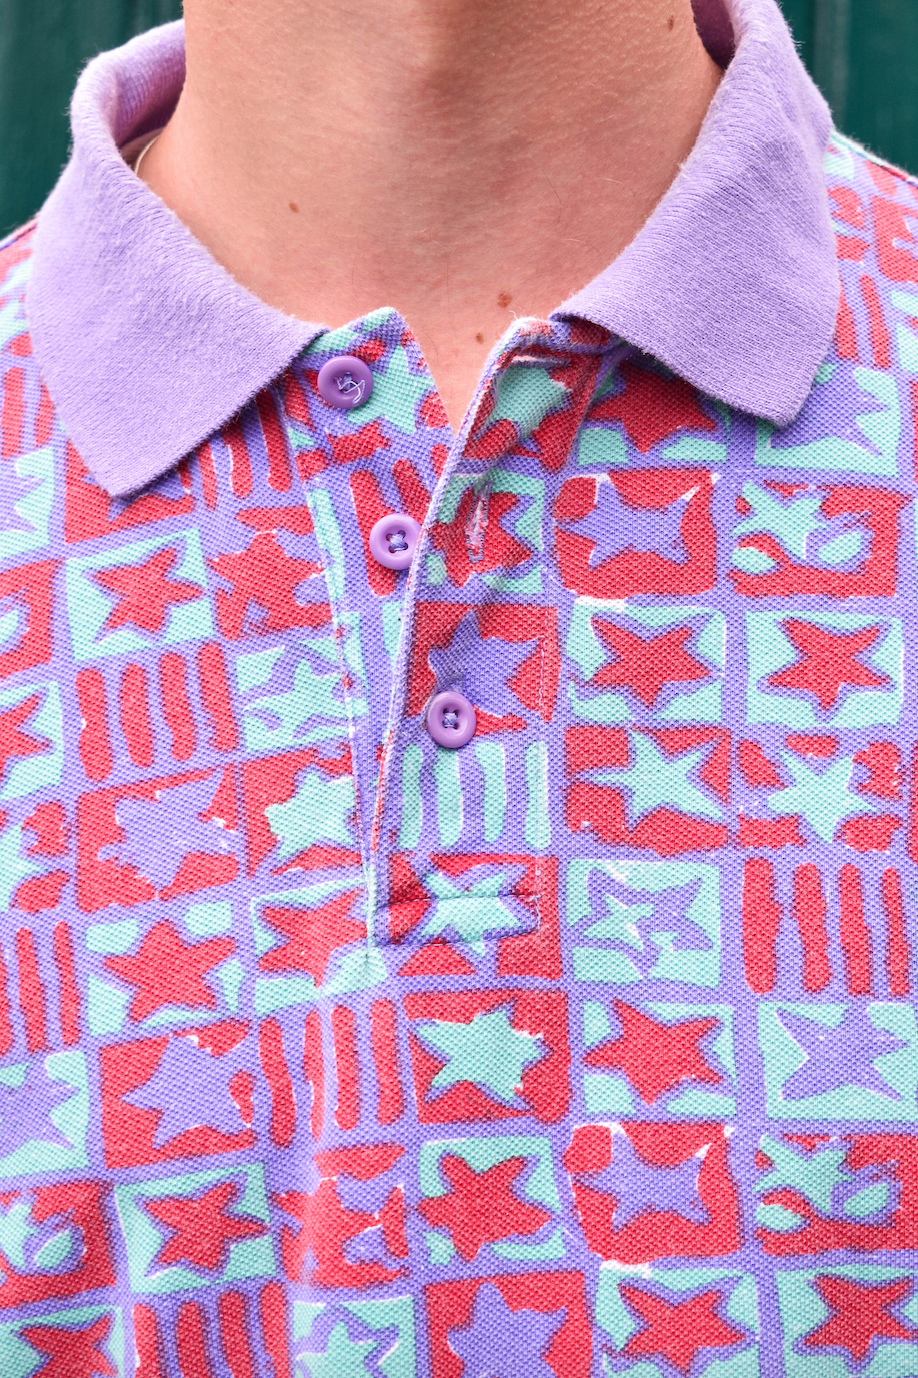 NEW IN! Patterned polo